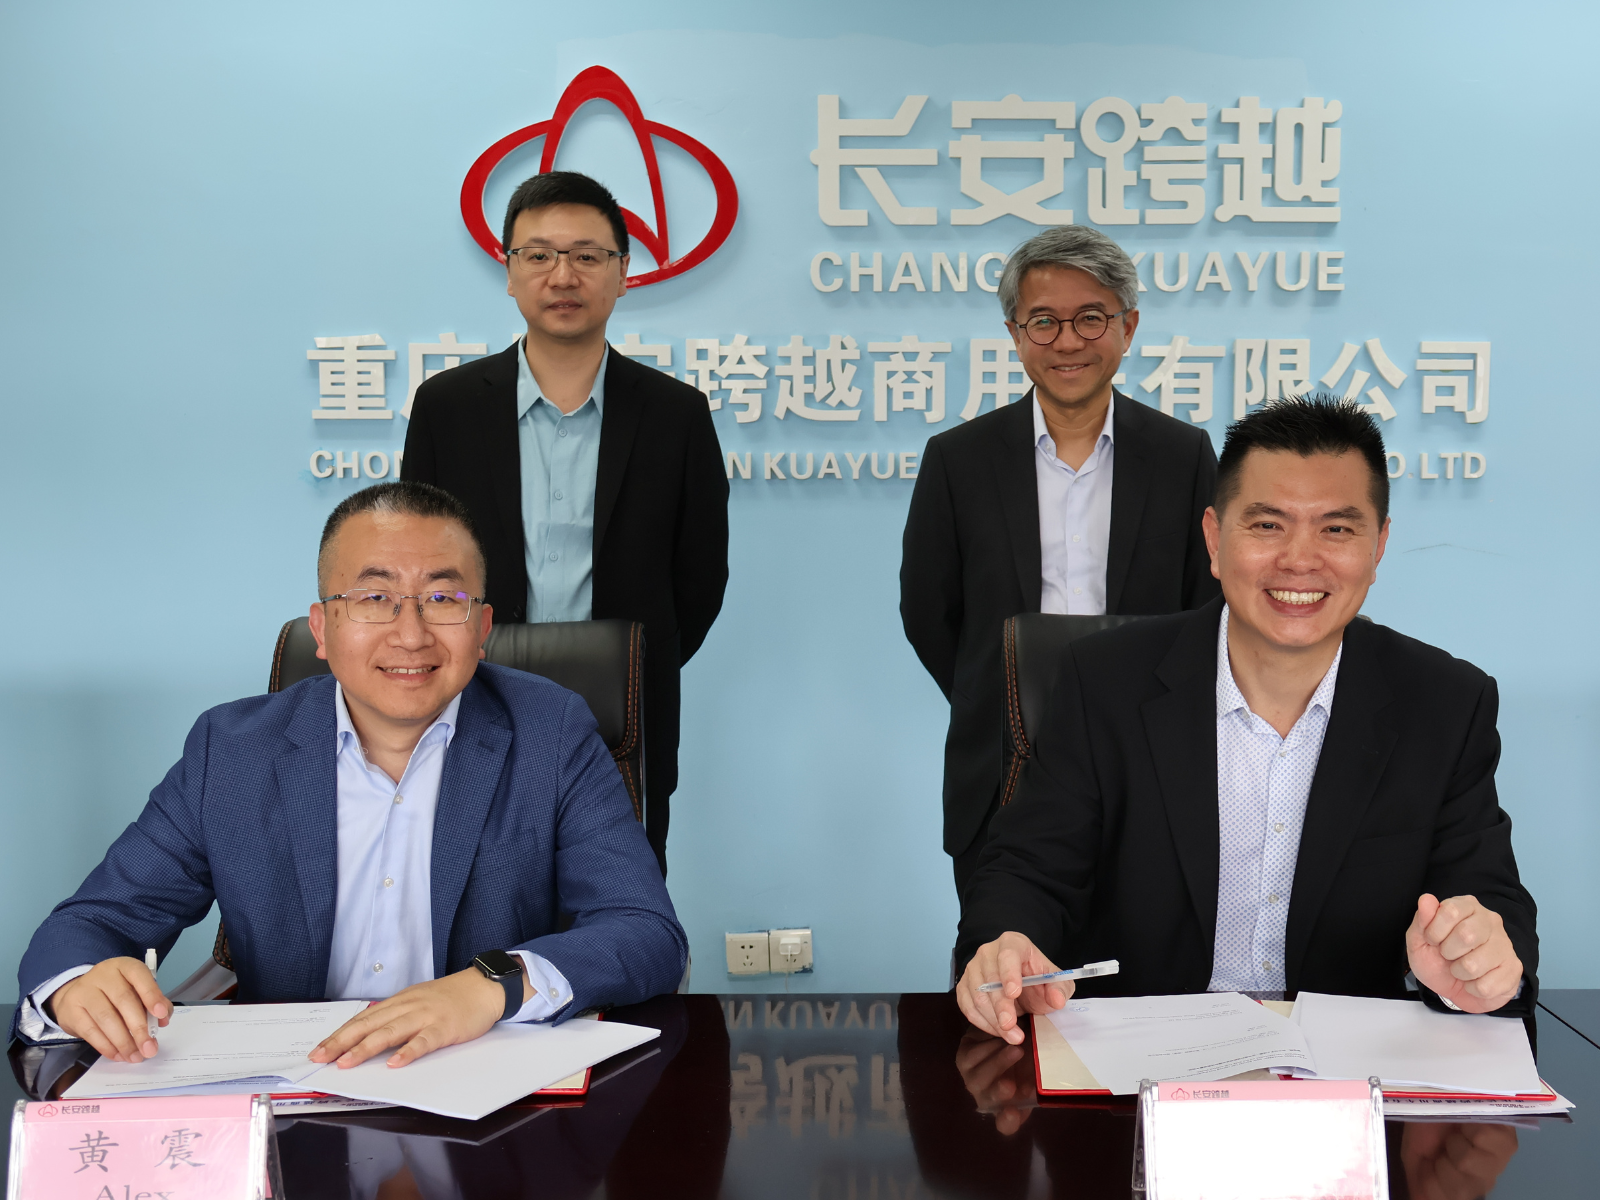 ComfortDelGro Engineering is excited to be appointed by ChangAn KuaYue (KYC) as the exclusive distributor of its commercial electric vehicles in Singapore.